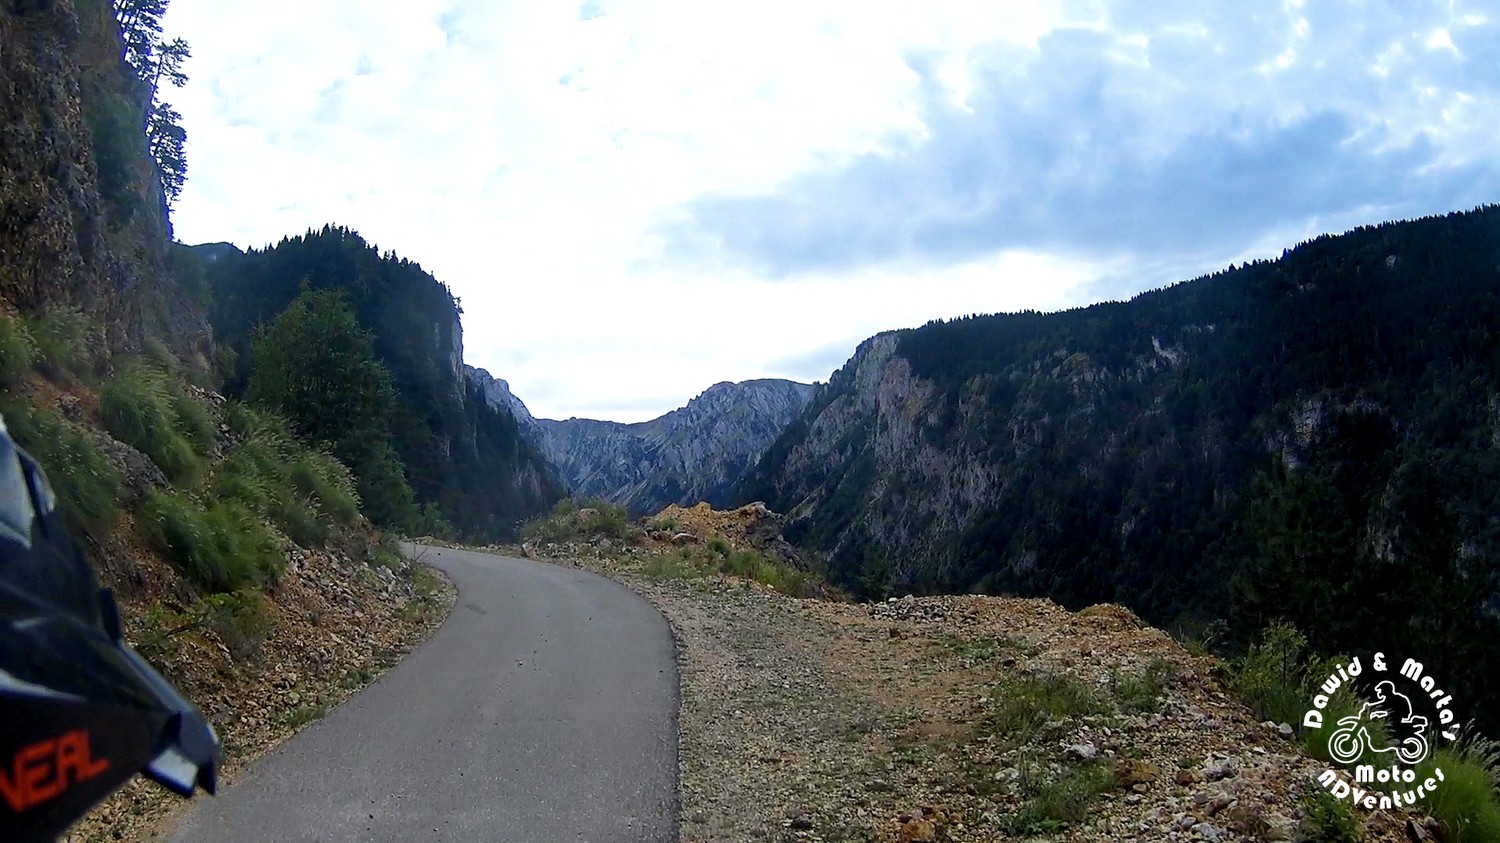 On the way from Susica Canyon to Zabljak